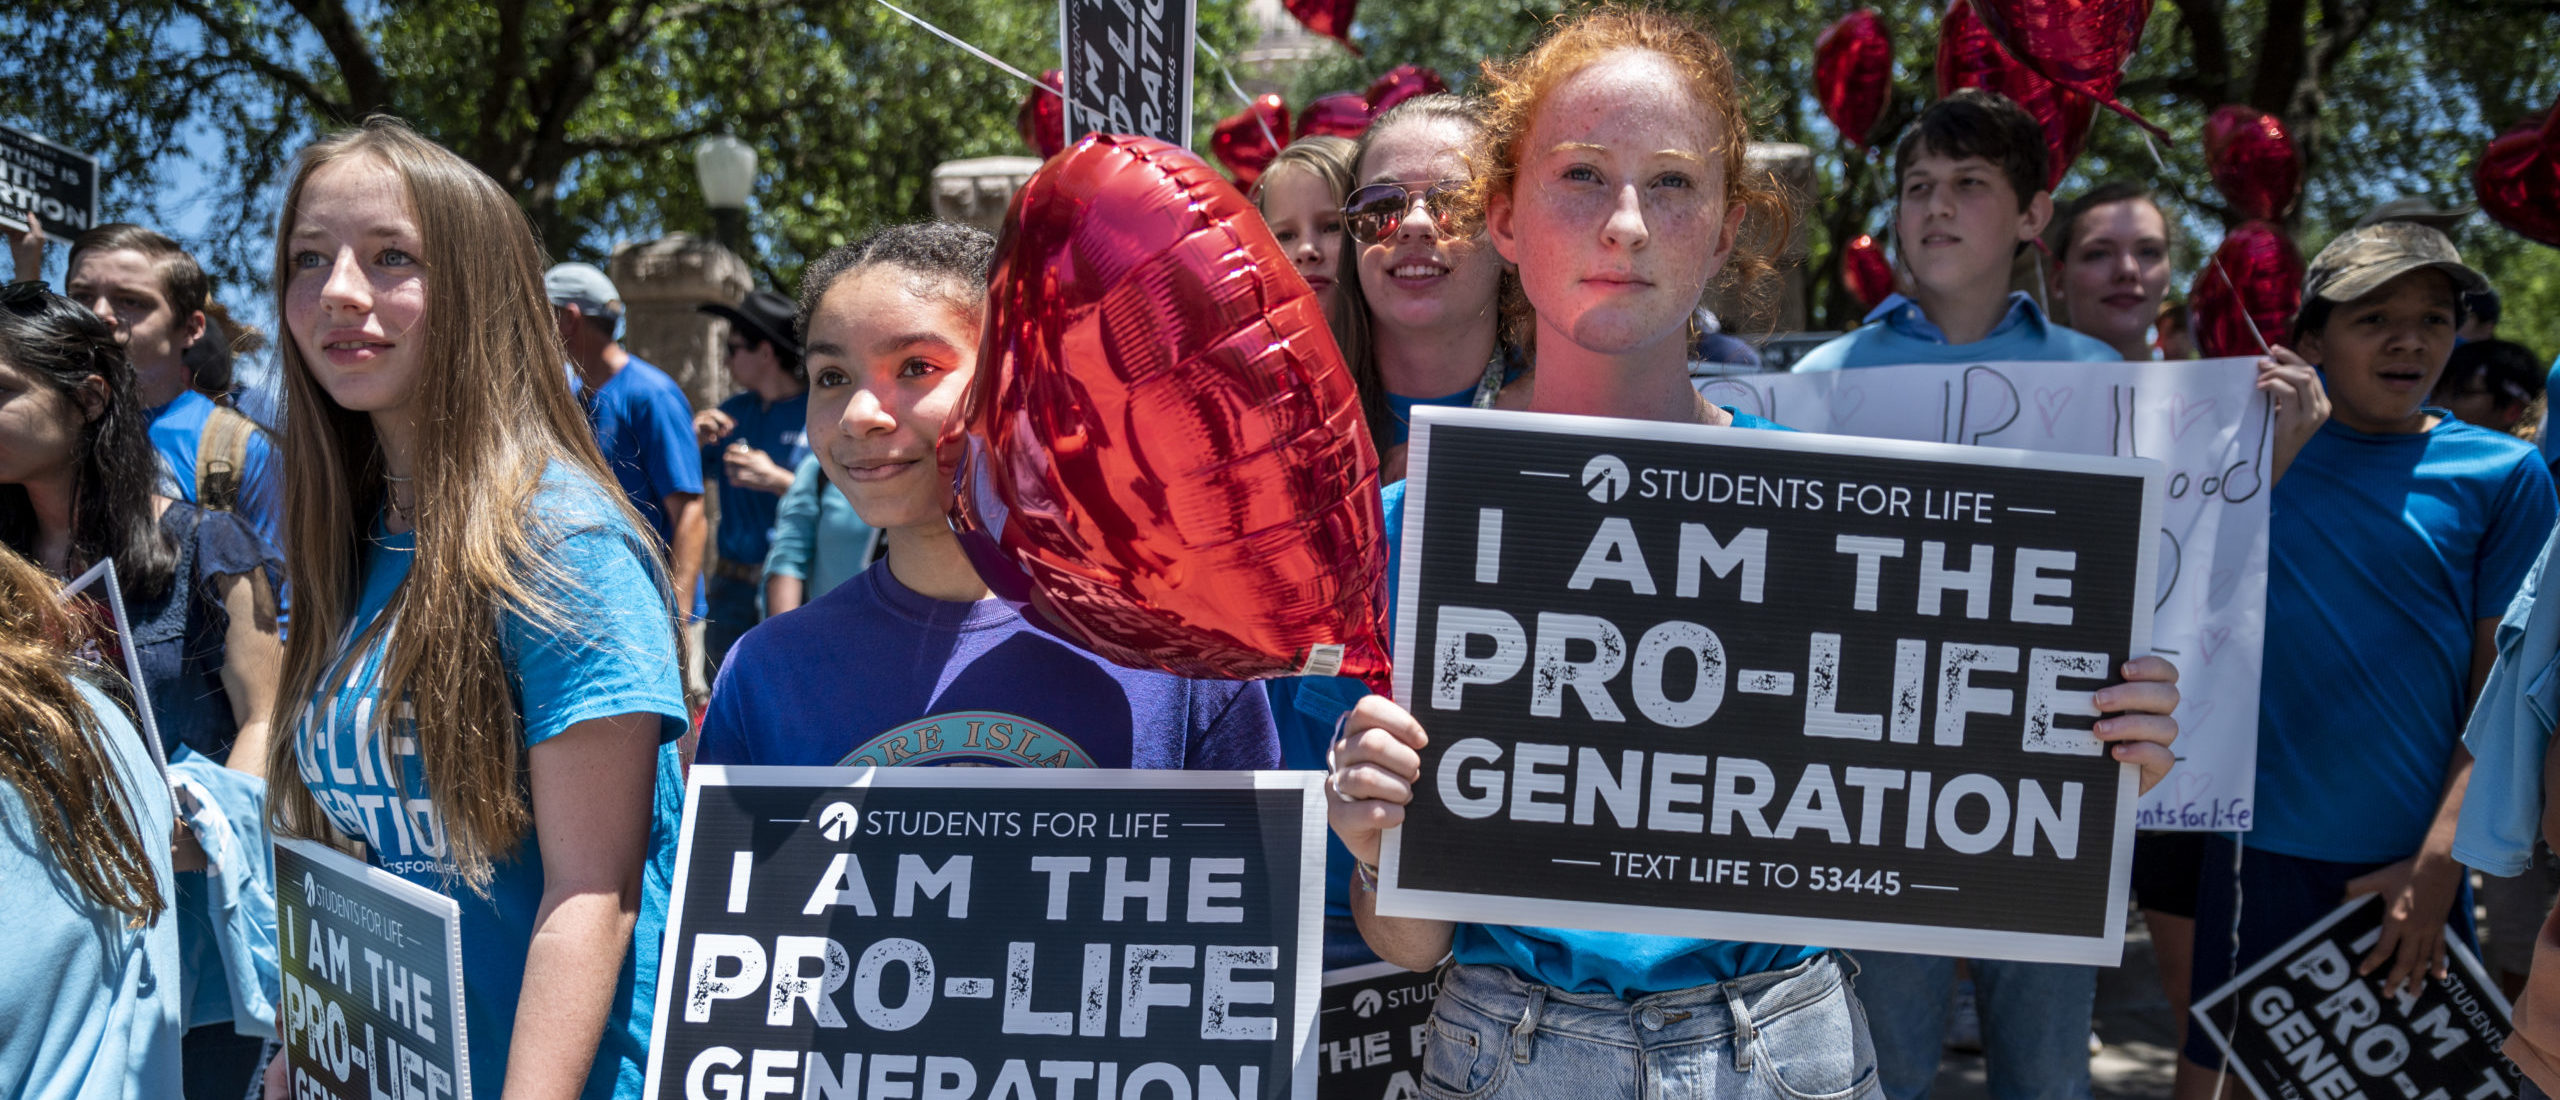 Pro-life protesters stand near the gate of the Texas state capitol at a protest outside the Texas state capitol on May 29, 2021 in Austin, Texas. (Photo by Sergio Flores/Getty Images)